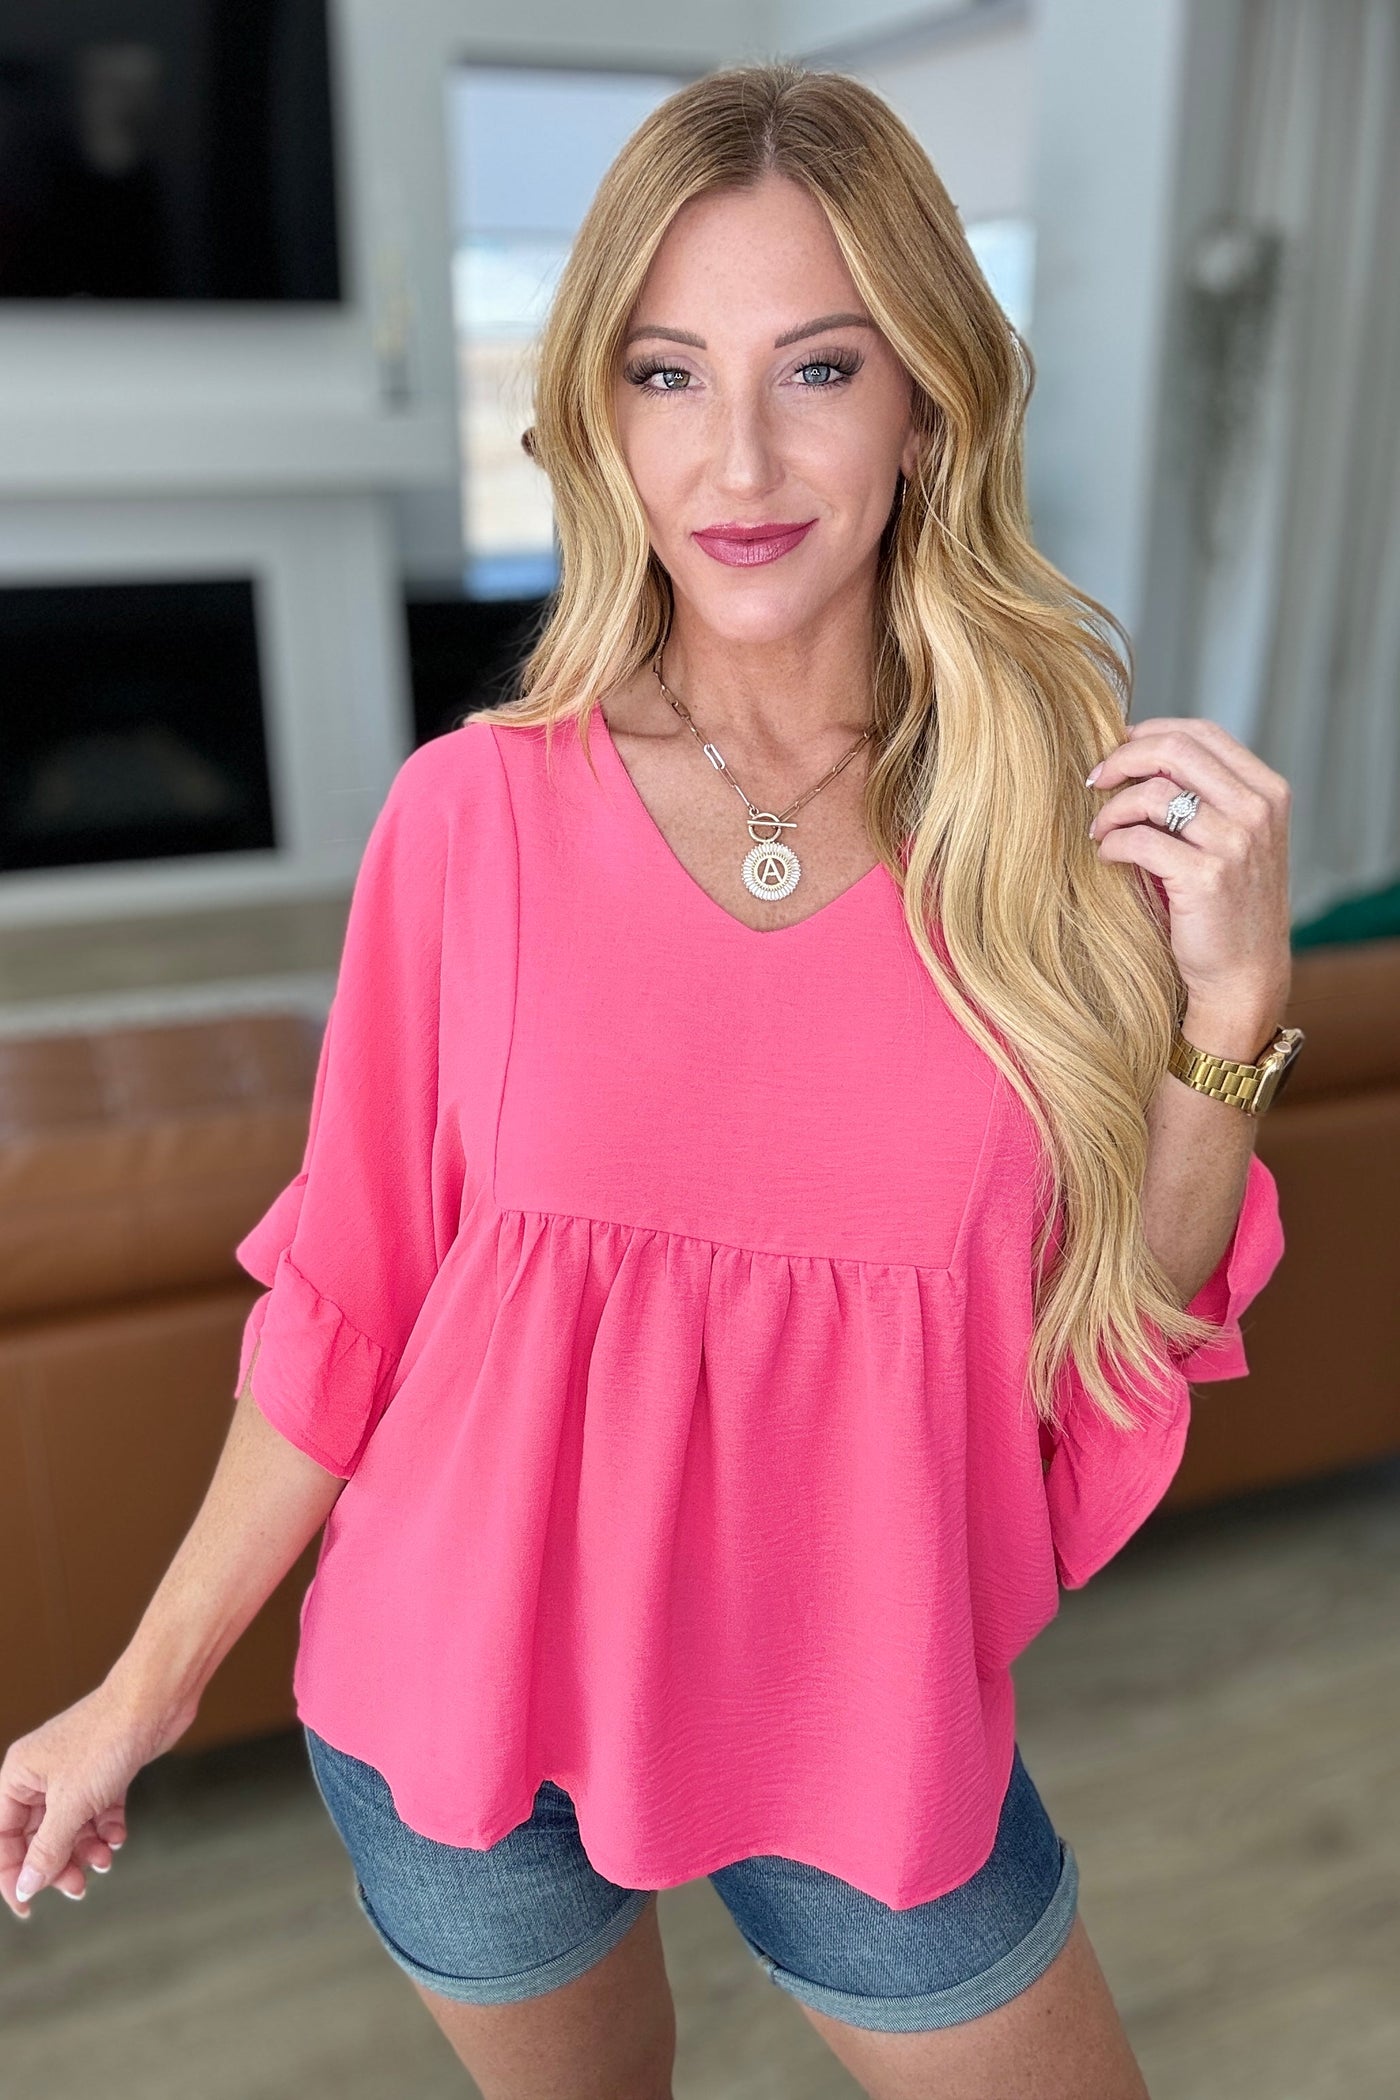 Airflow Peplum Ruffle Sleeve Top in Hot Pink-Tops-Ave Shops-Market Street Nest, Fashionable Clothing, Shoes and Home Décor Located in Mabank, TX